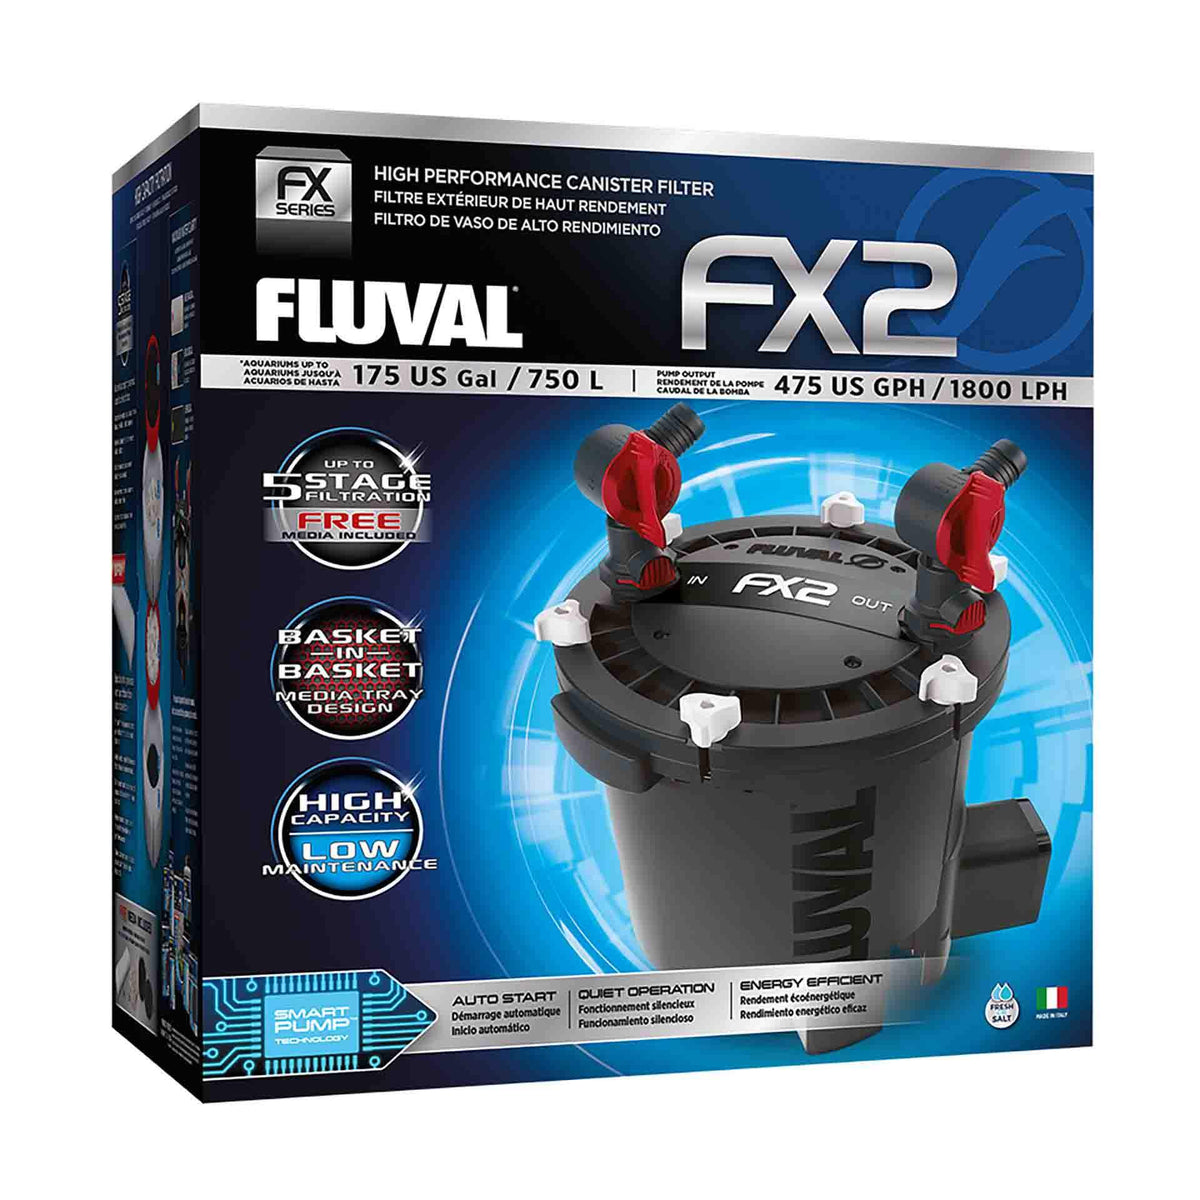 Fluval FX2 High Performance Canister Filter, up to 750 L